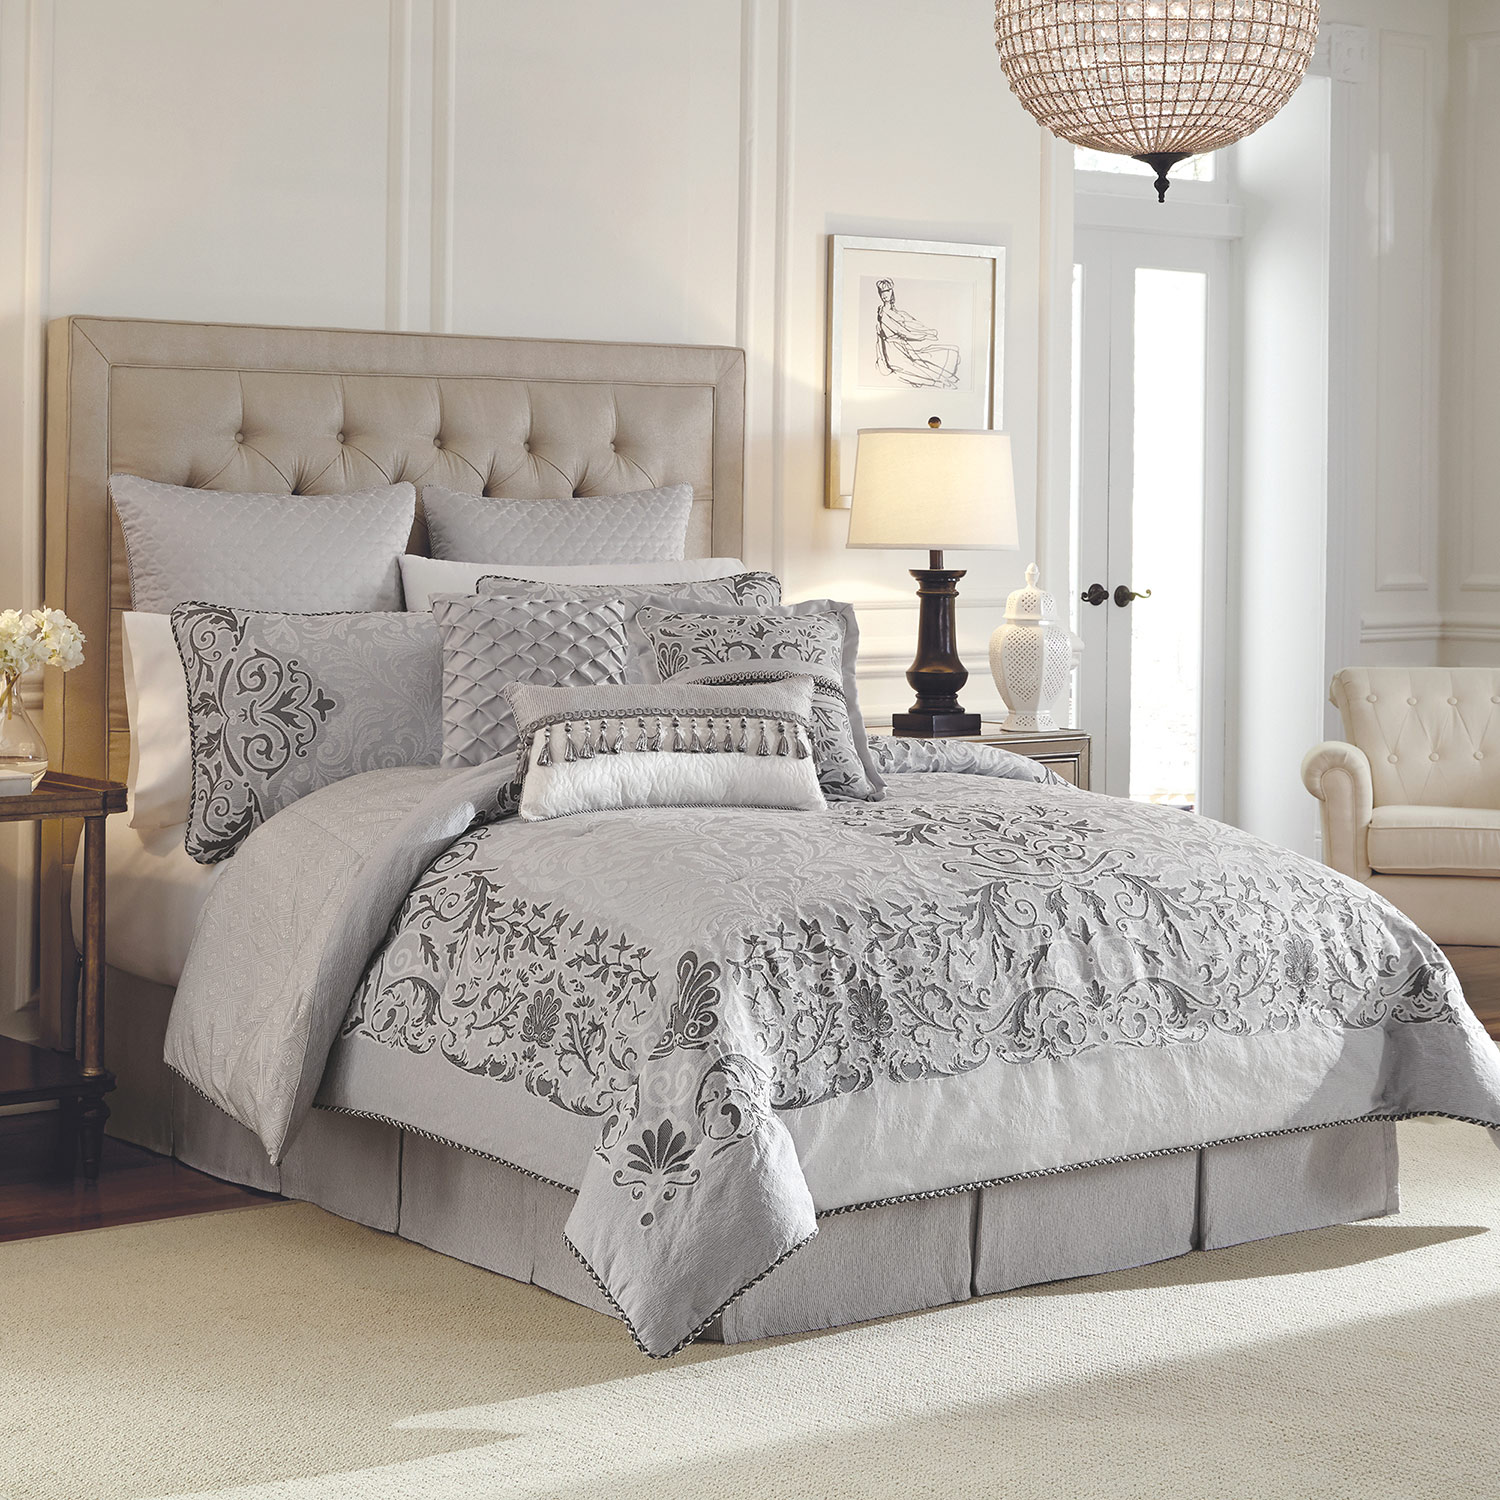 Luxembourg by Croscill Home Fashions - BeddingSuperStore.com